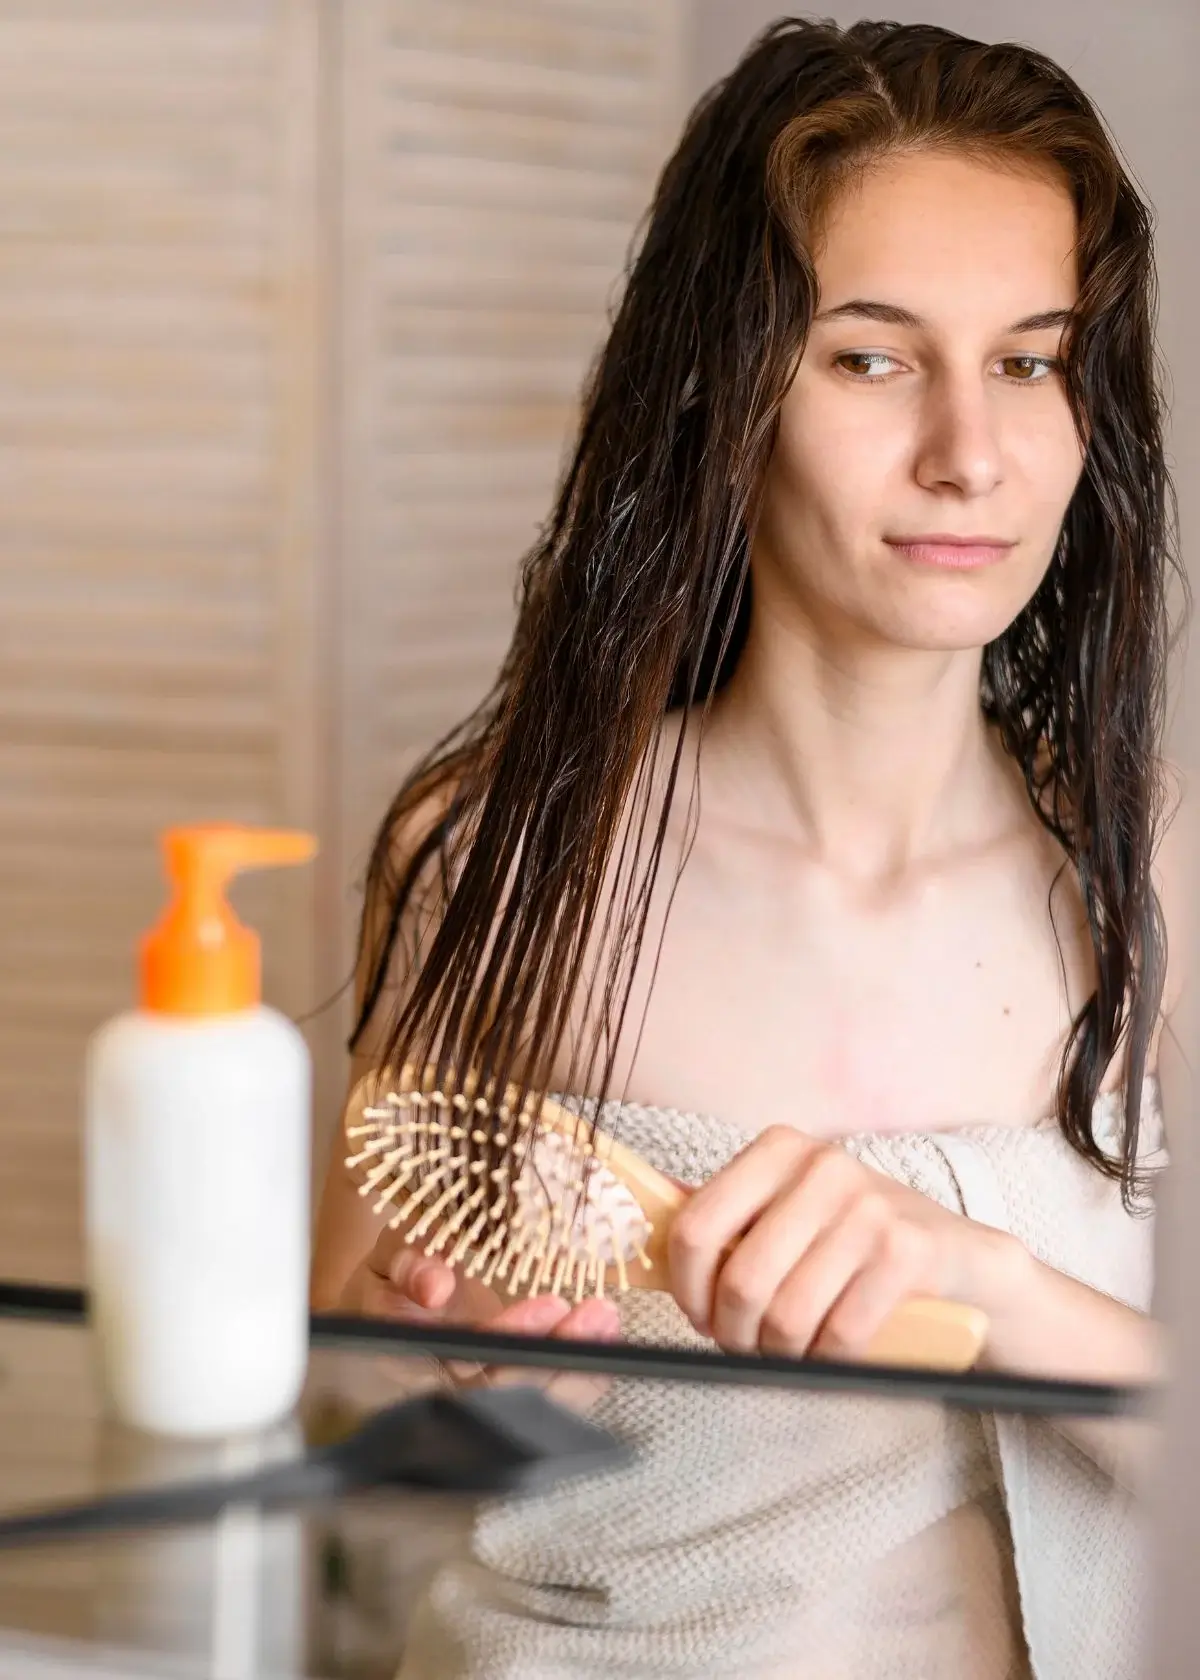 How to choose the right shampoo for postpartum hair loss?